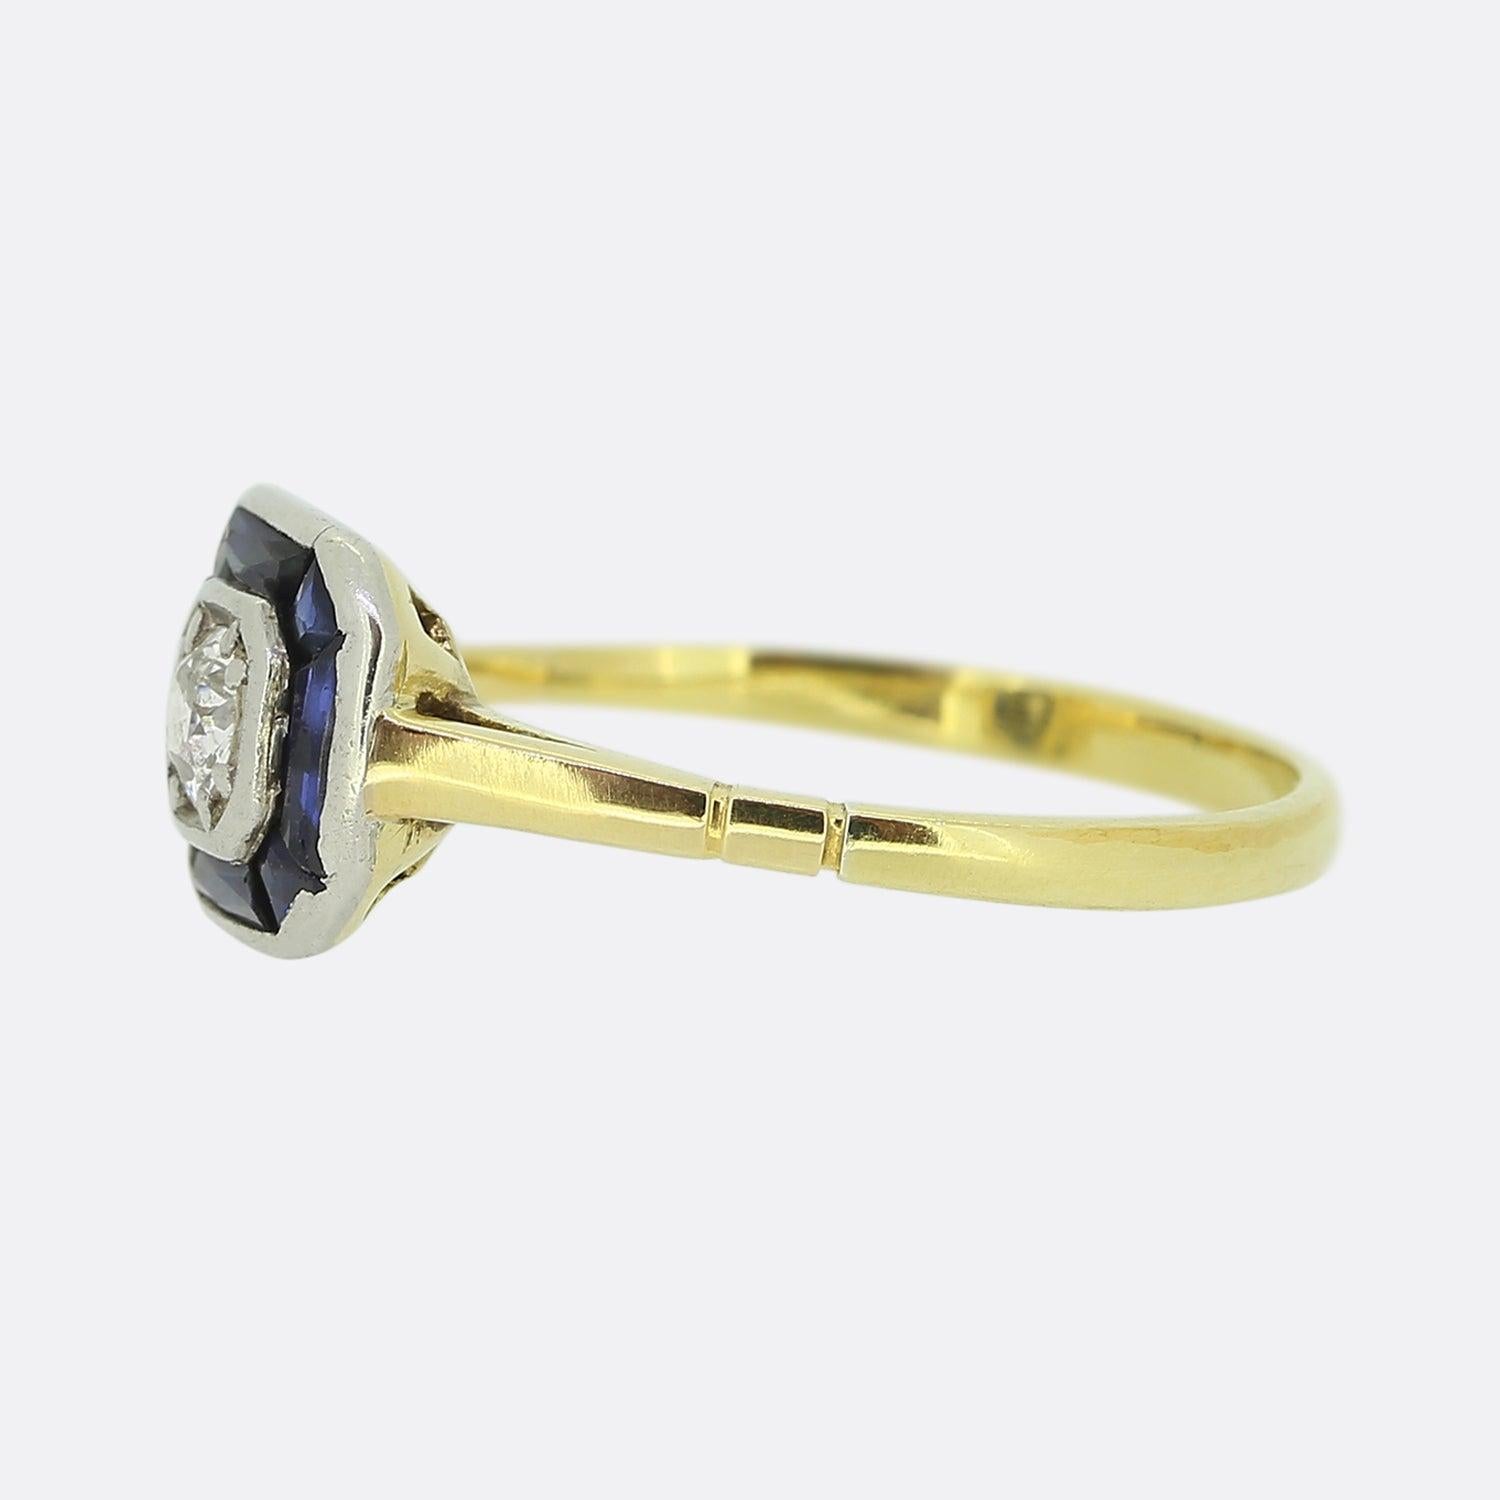 Here we have a delightful piece from a time when the Art Deco style was at the height of design. A single round faceted old cut diamond sits slightly risen at the centre of the face and is framed by a single row of calibrated sapphires possessing a